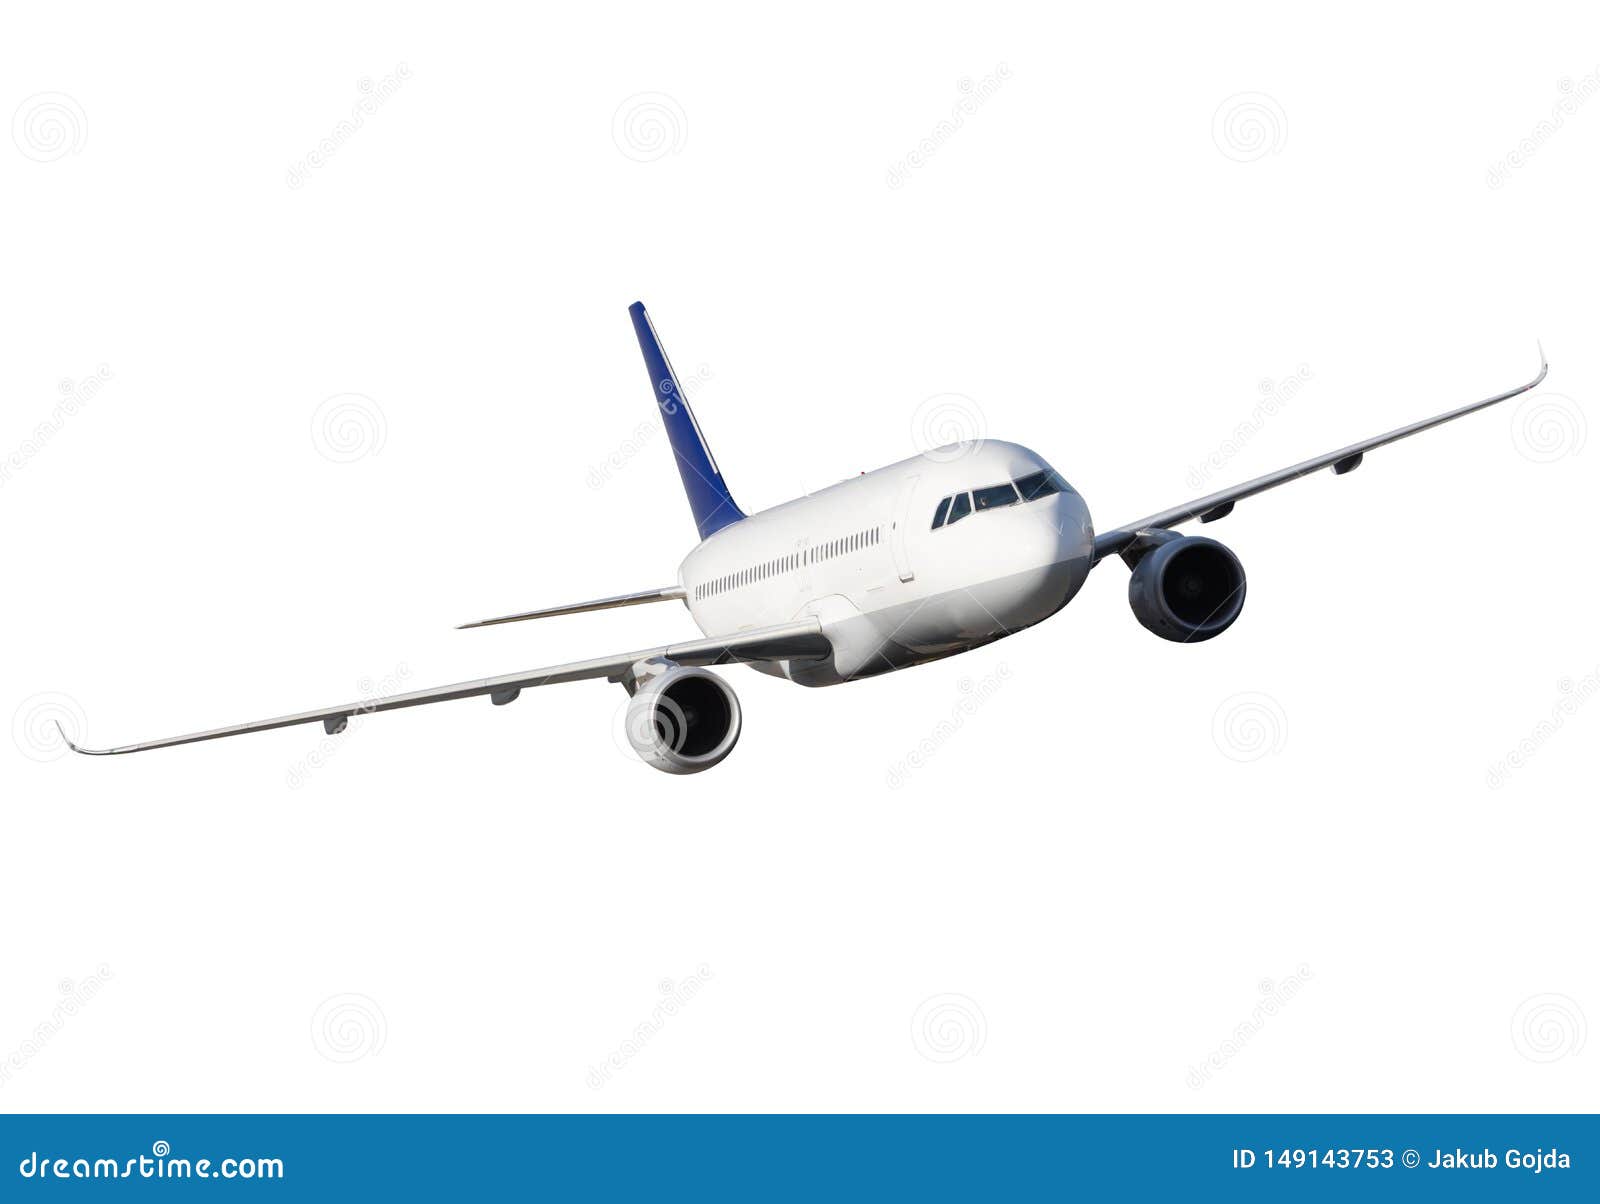 16,177 Commercial Flight White Background Stock Photos - Free &  Royalty-Free Stock Photos from Dreamstime